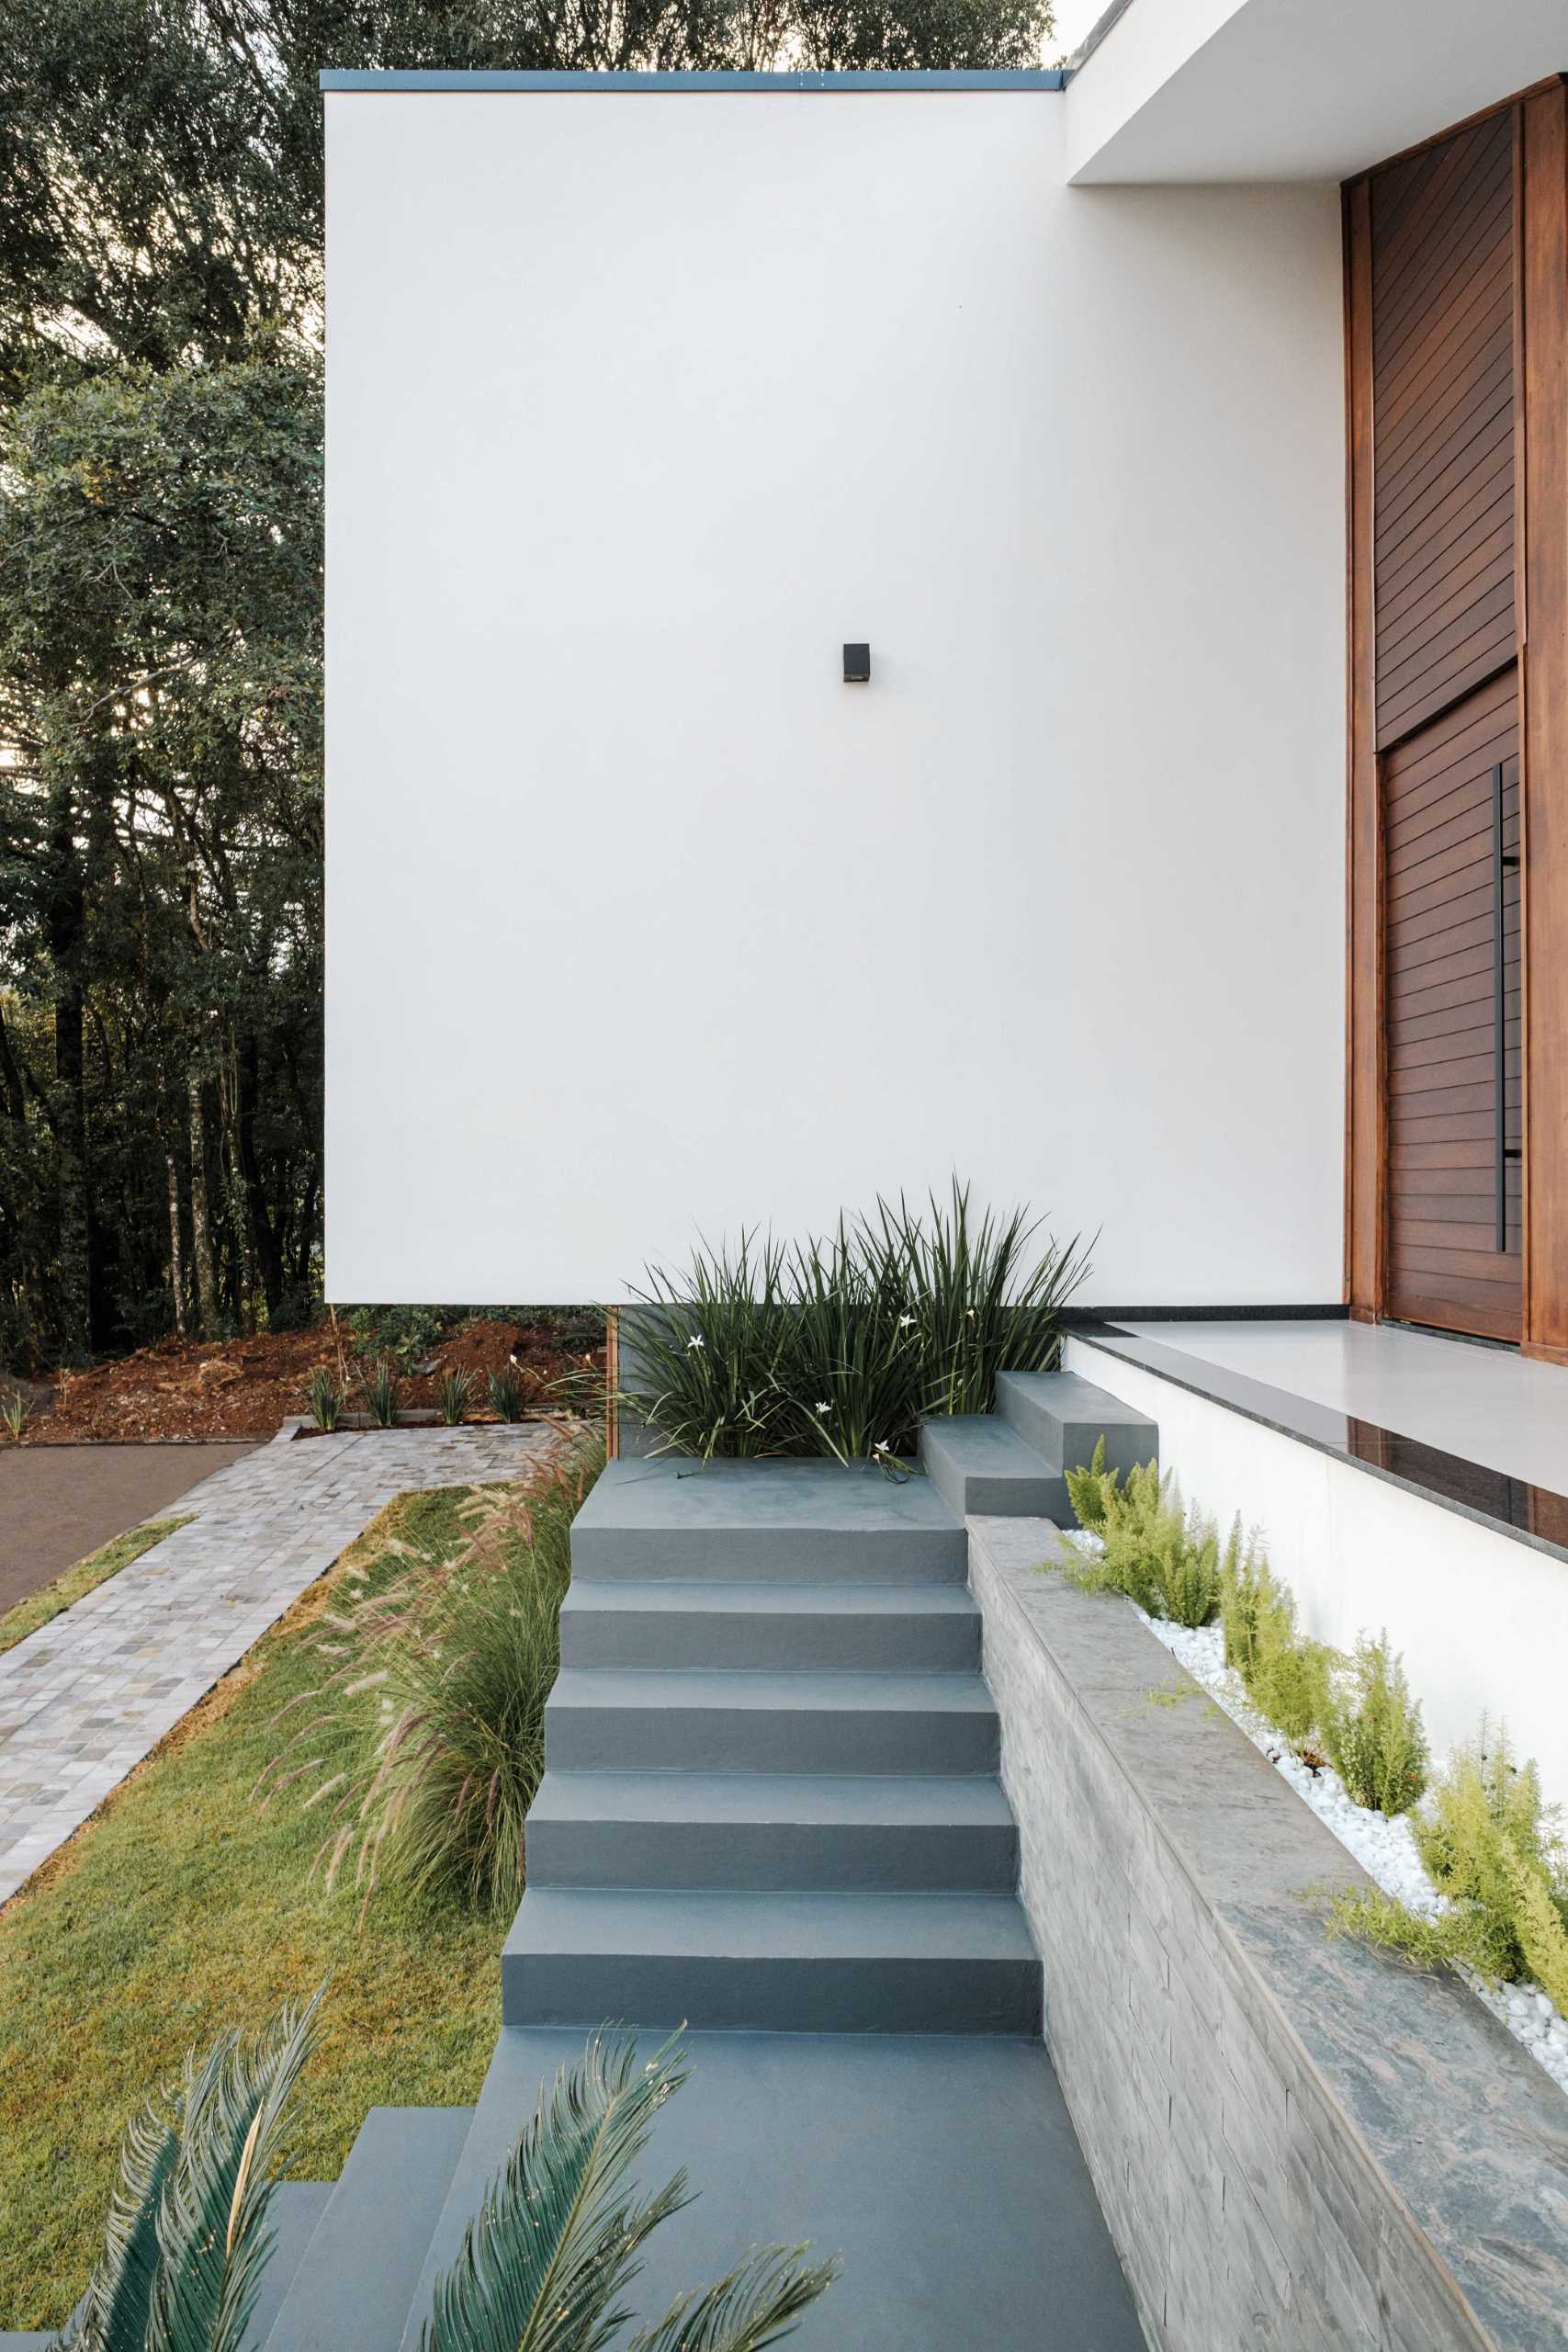 A modern home with steps that lead through the landscaping and built-in planters, and up to the front door.